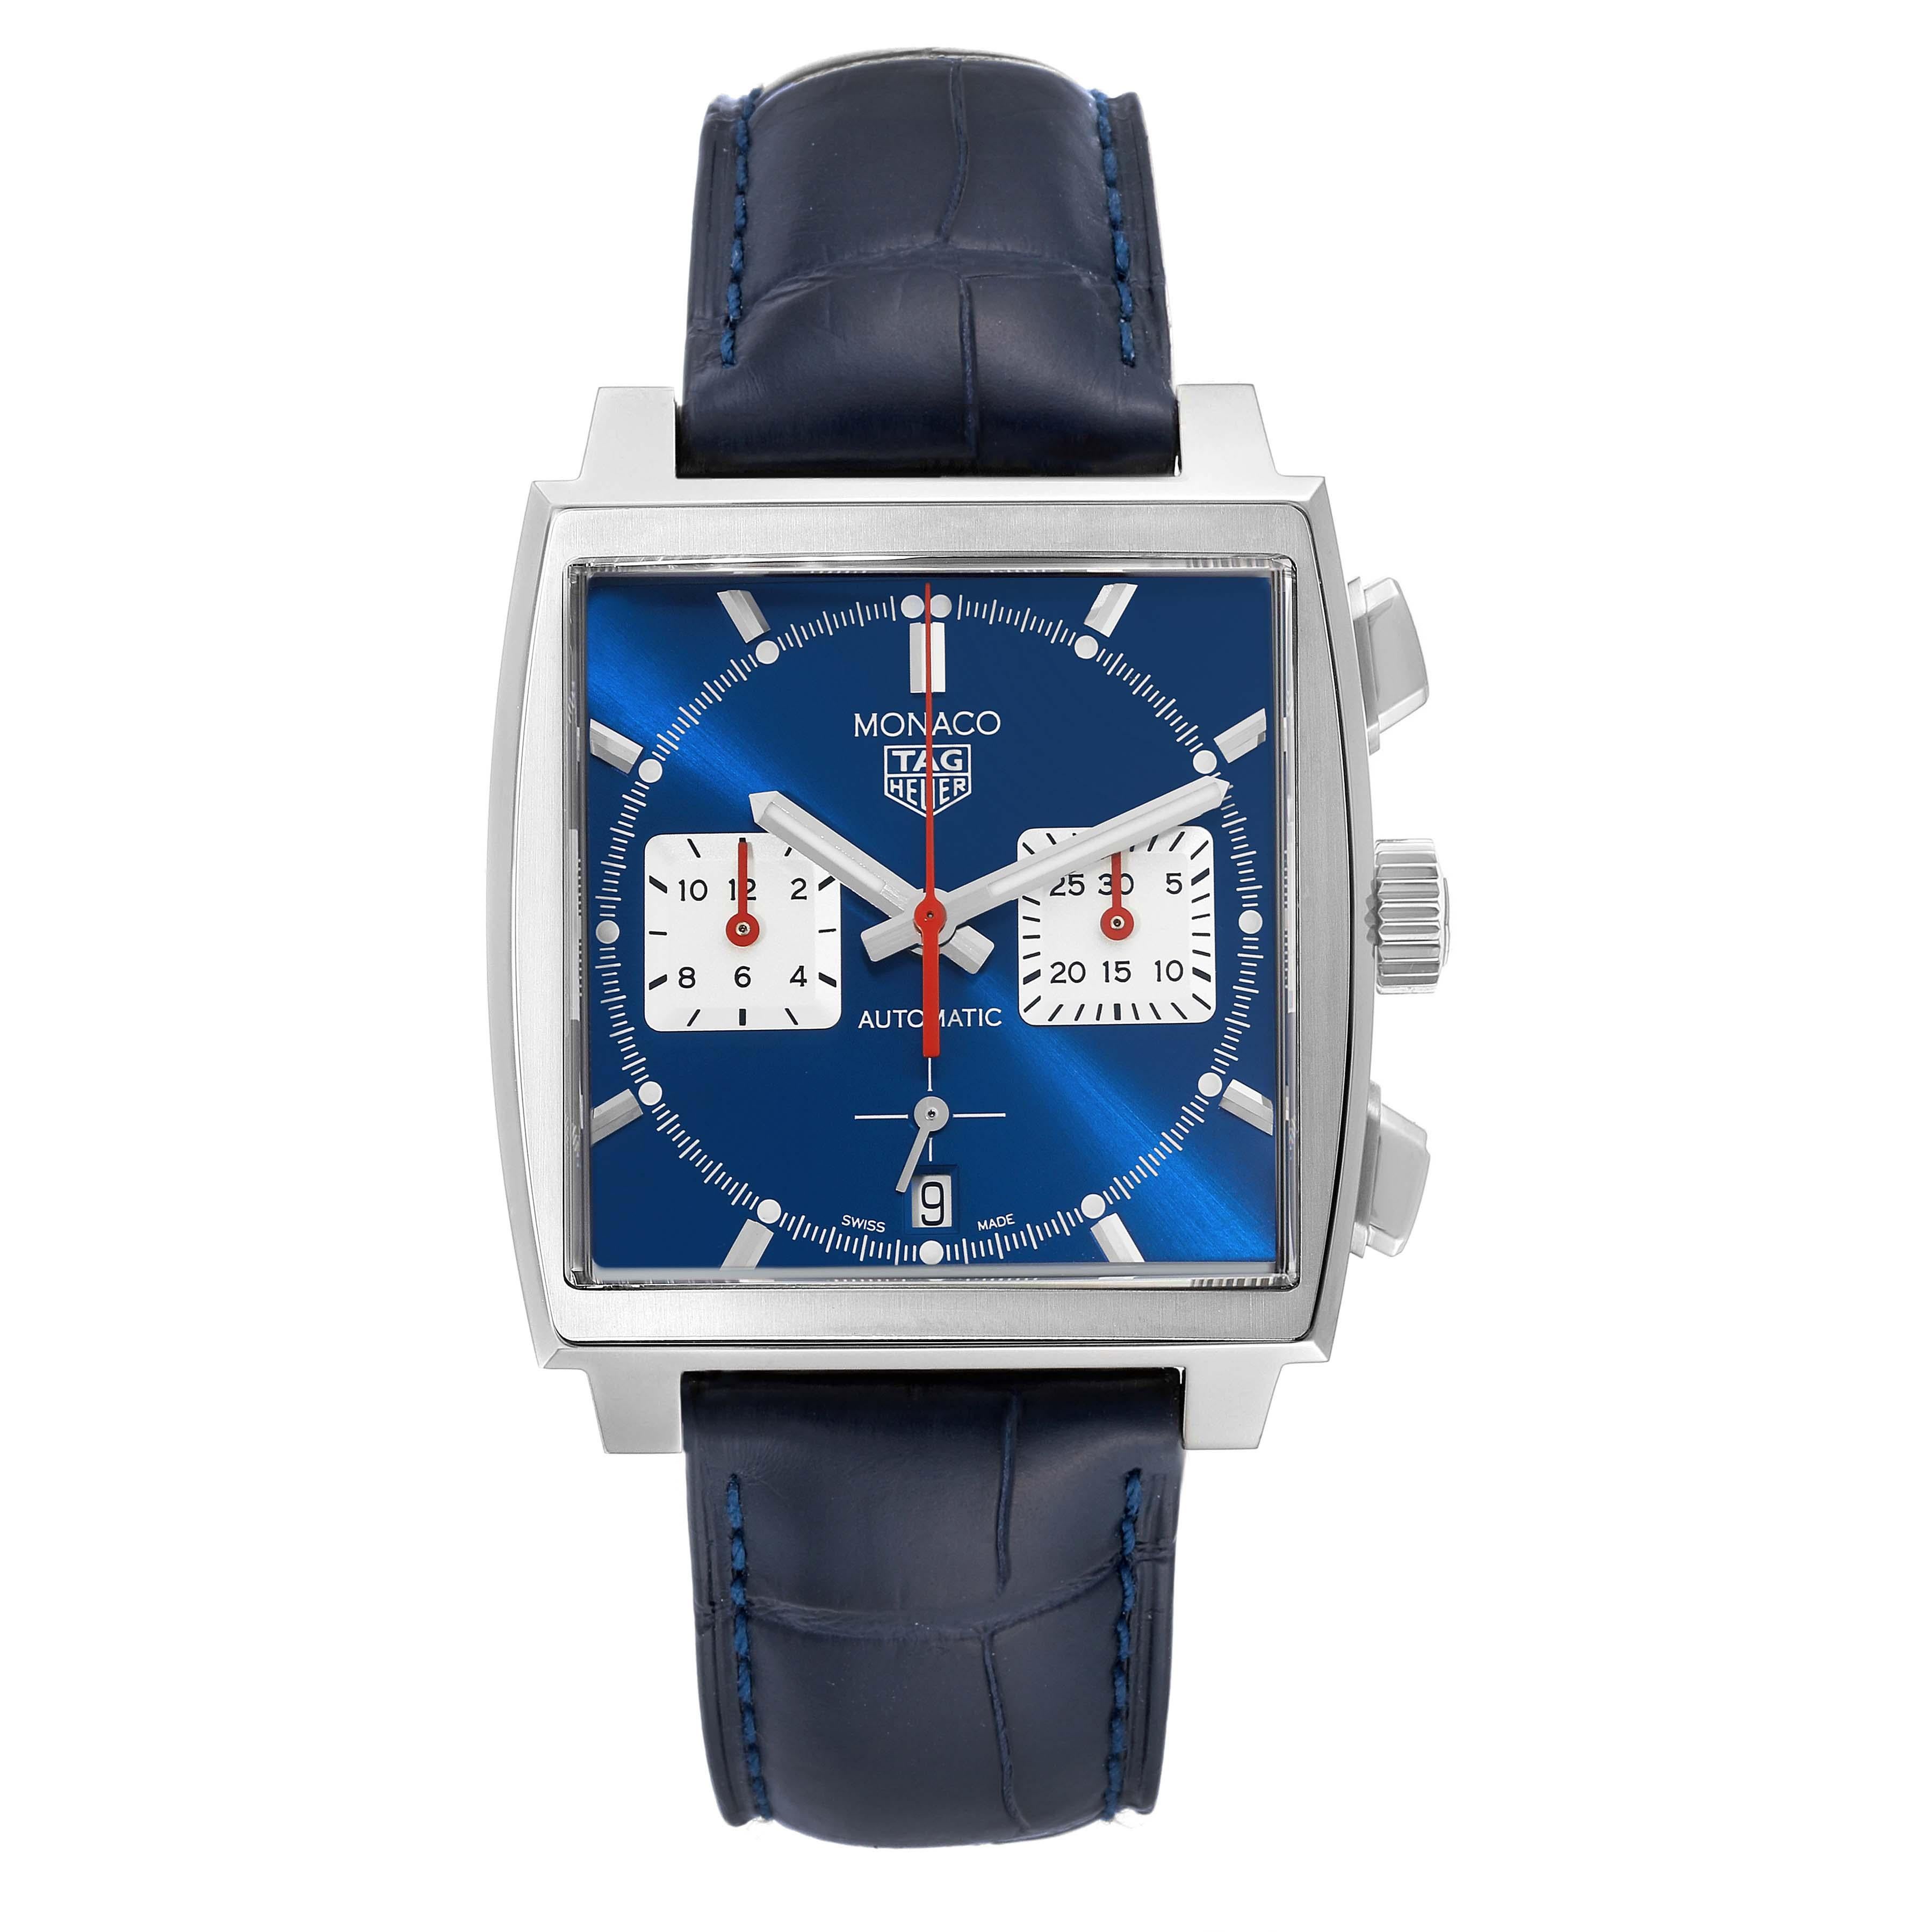 Tag Heuer Monaco Calibre 02 Blue Dial Steel Mens Watch CBL2111 Box Card. Automatic self-winding movement. Alternate fine-brushed and polished stainless steel case 39.0 x 39.0 mm. Fluted crown. Transparent exhibition sapphire crystal caseback.